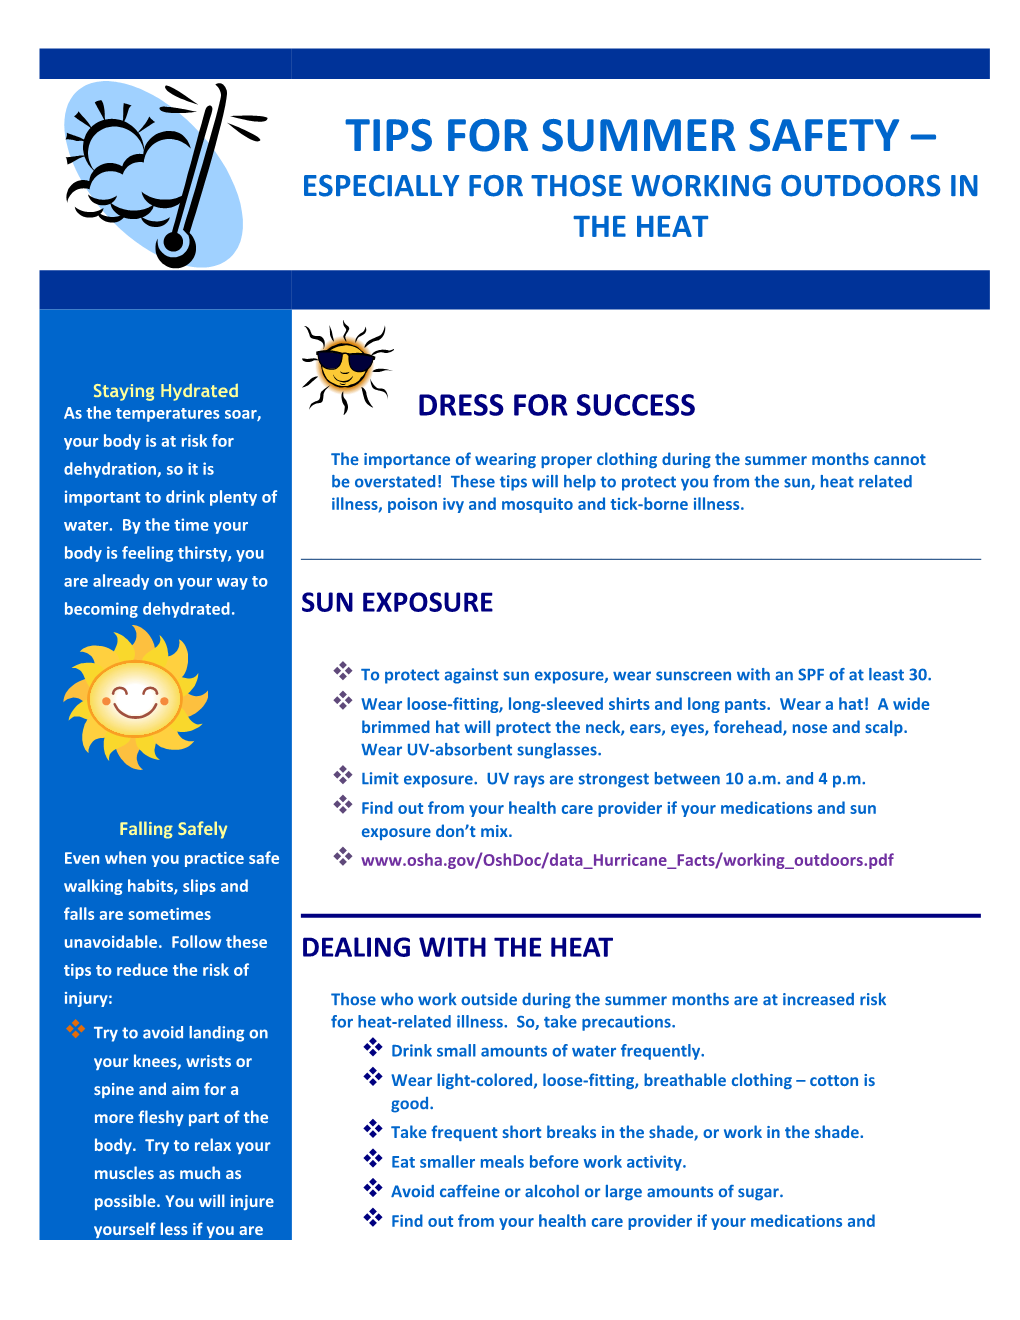 Tips for Summer Safety Especially for Those Working Outdoors in the Heat